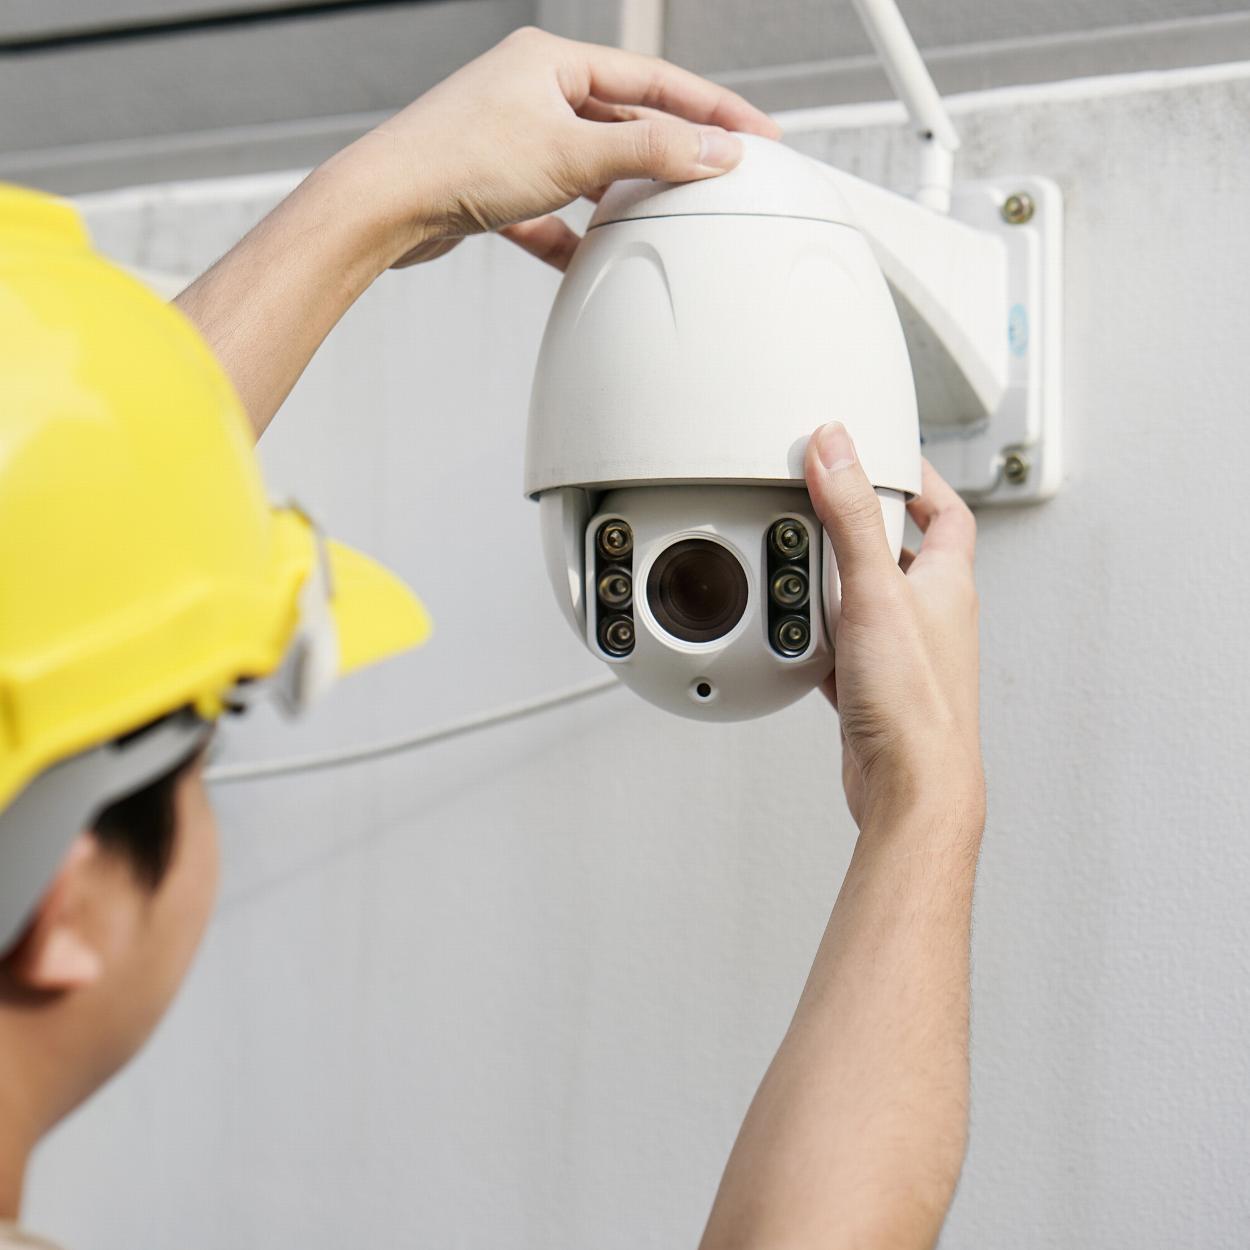 Man installing security camera on wall